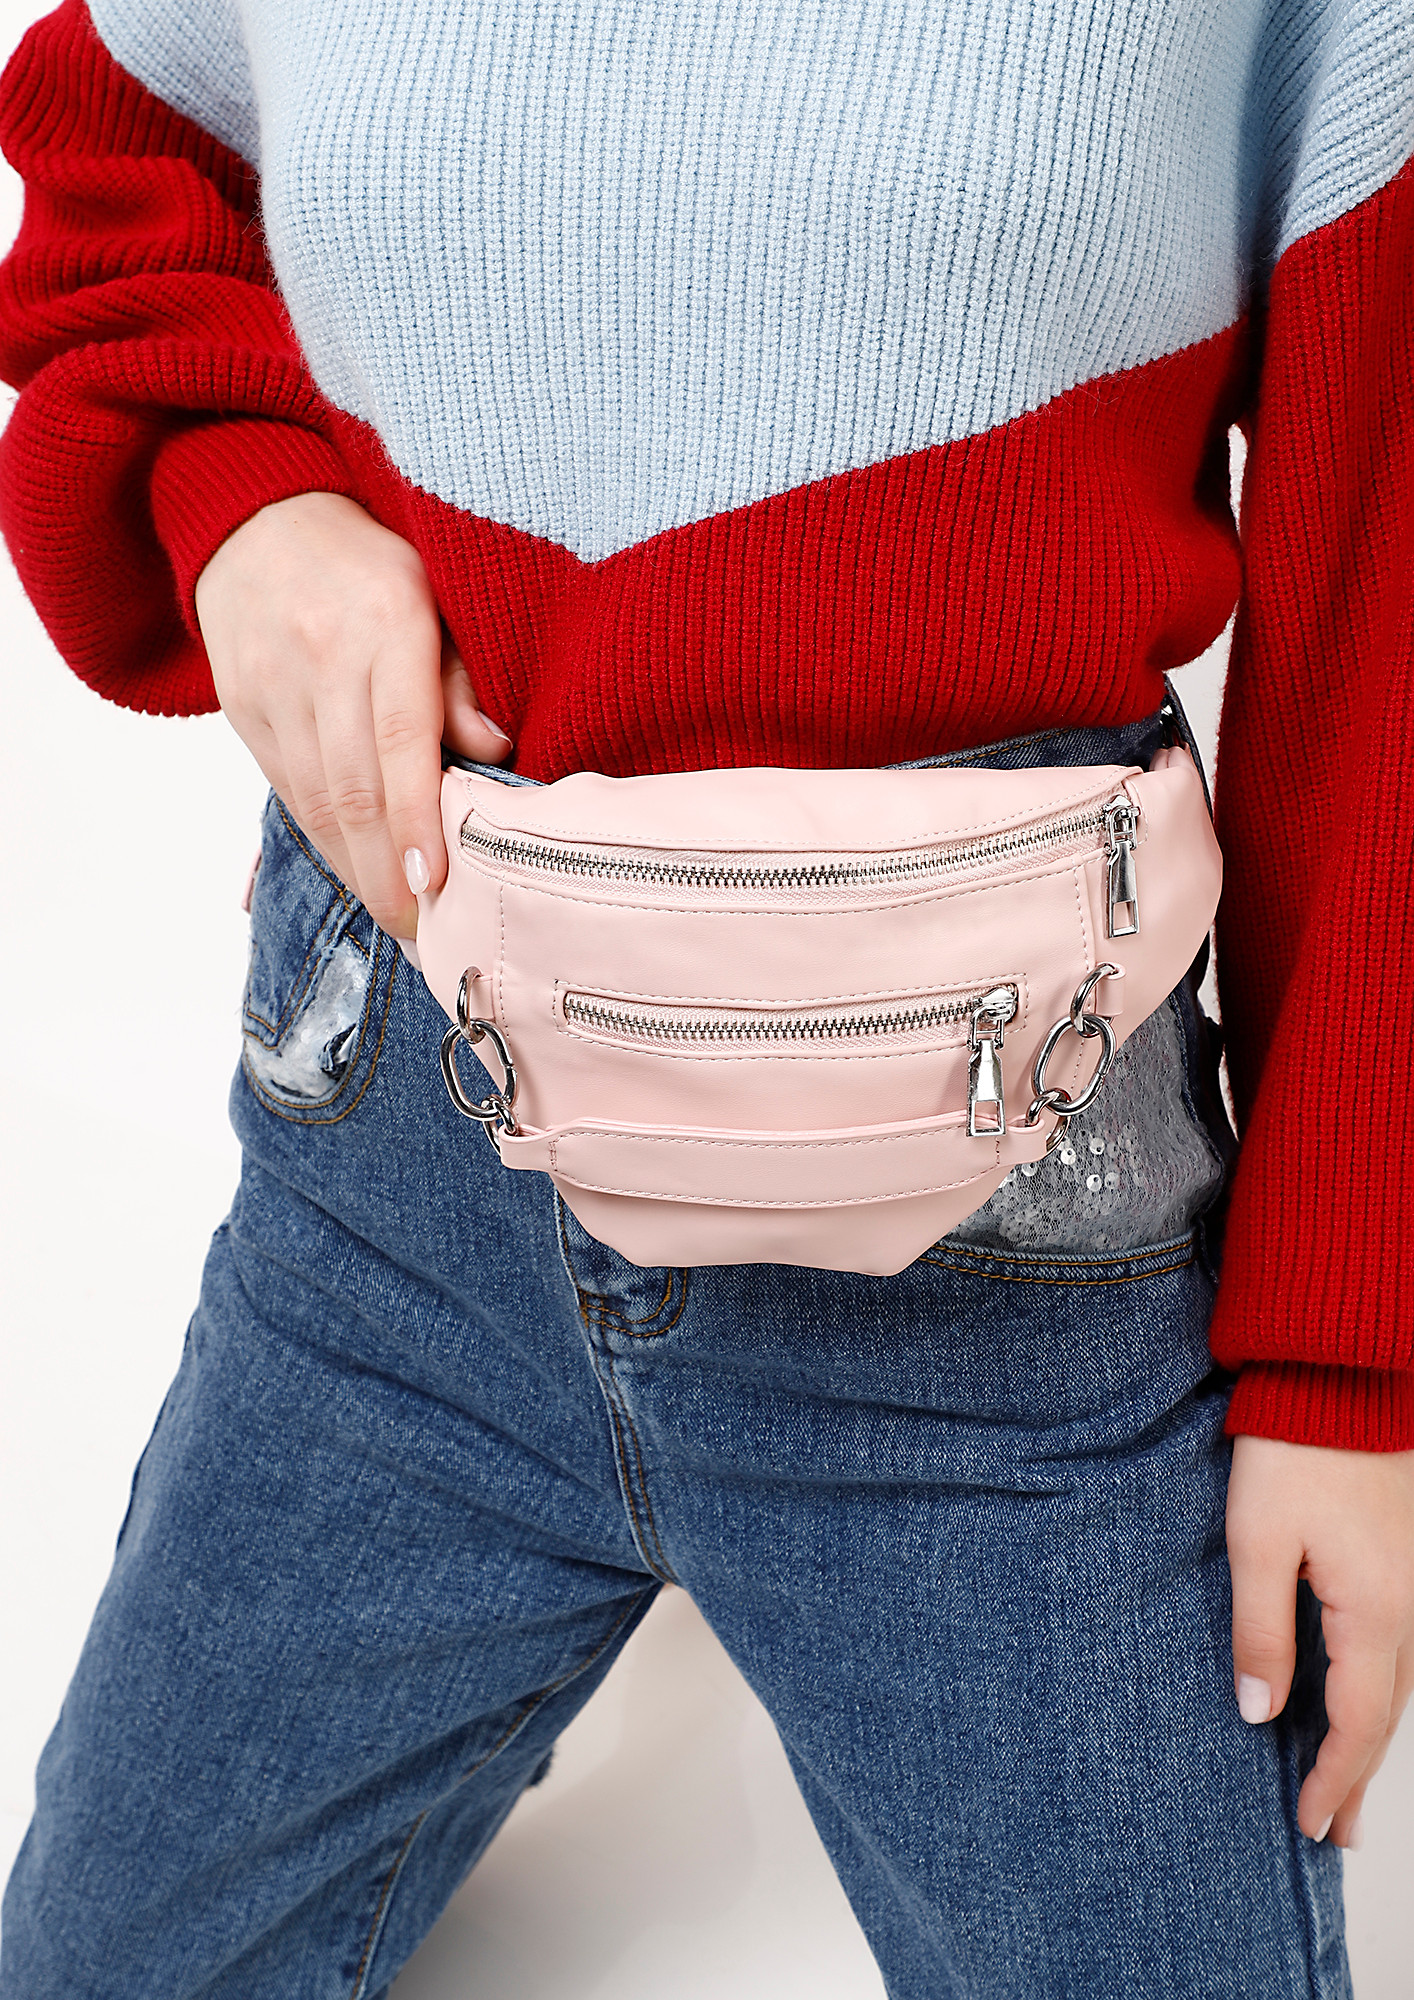 QUEEN OF HEARTS PINK FANNY PACK